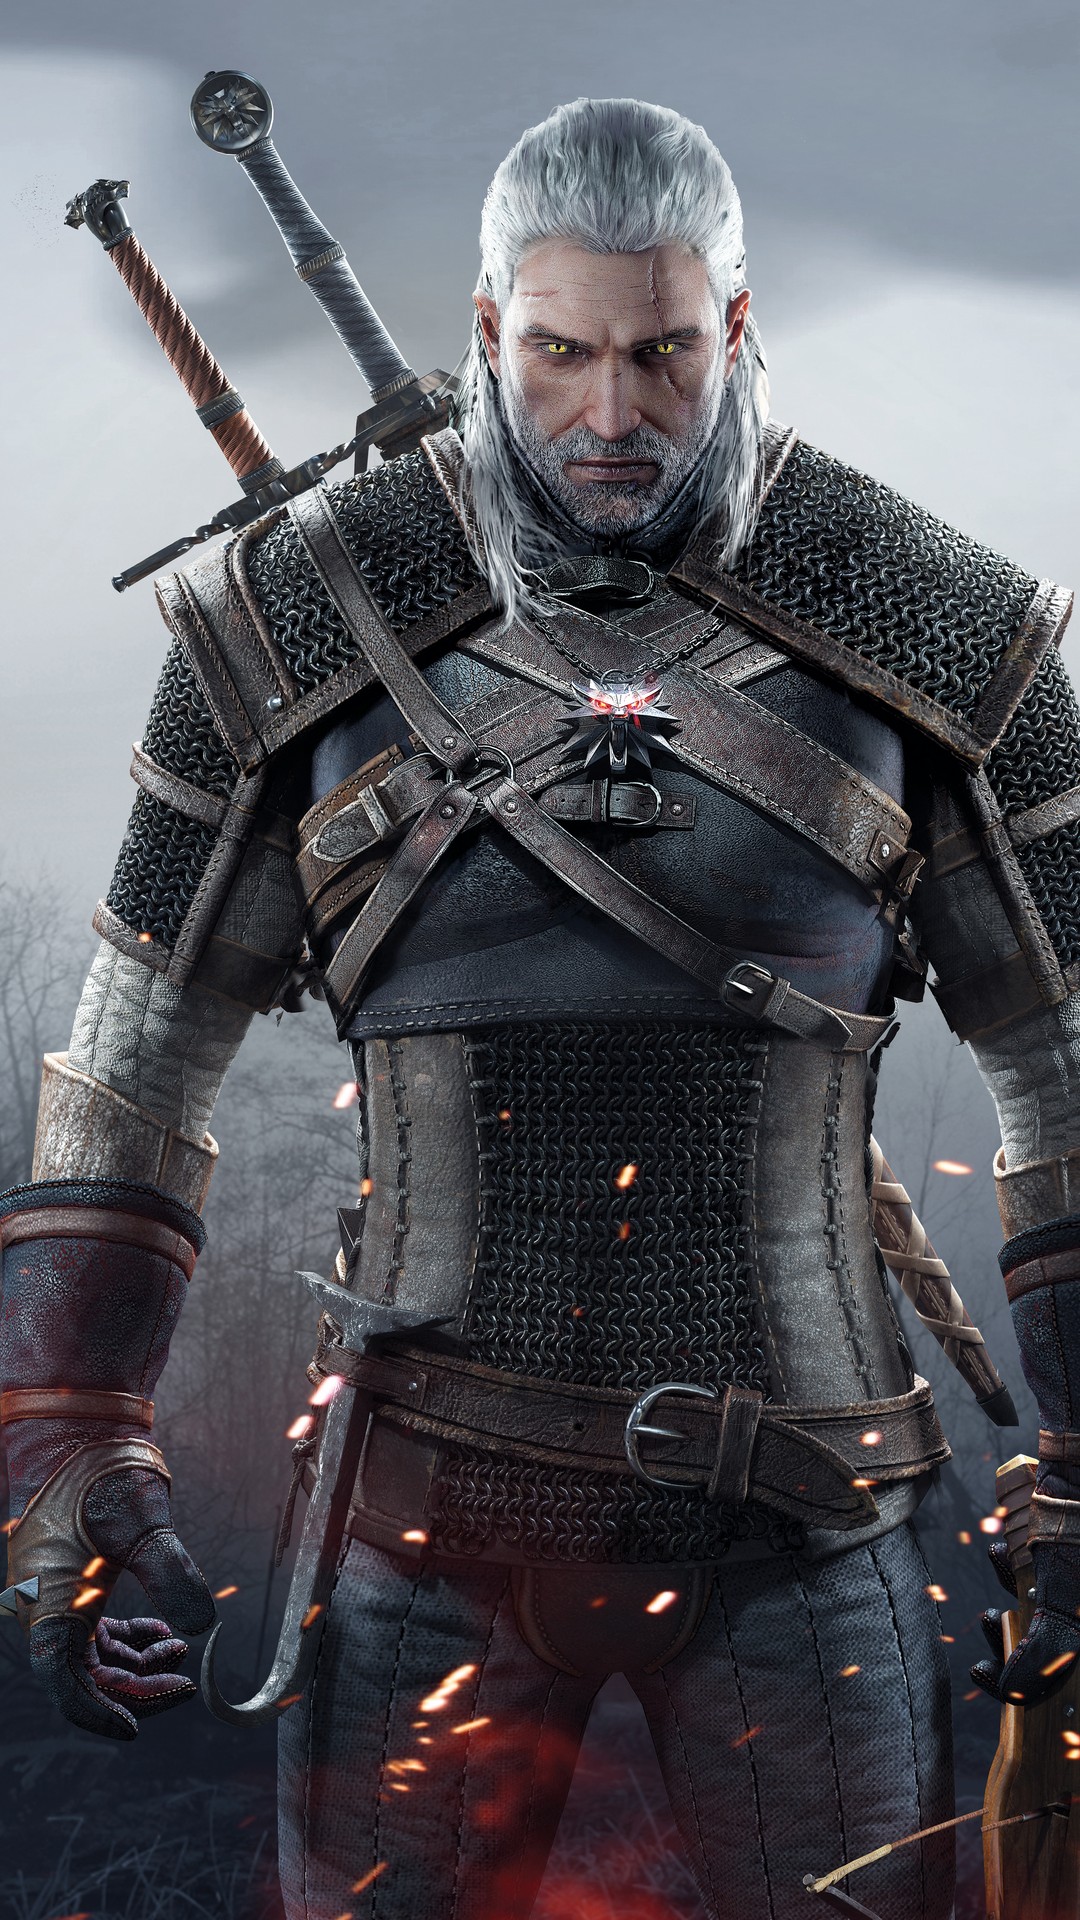 The Witcher iPhone 8 Wallpaper With high-resolution 1080X1920 pixel. You can use this wallpaper for your iPhone 5, 6, 7, 8, X, XS, XR backgrounds, Mobile Screensaver, or iPad Lock Screen